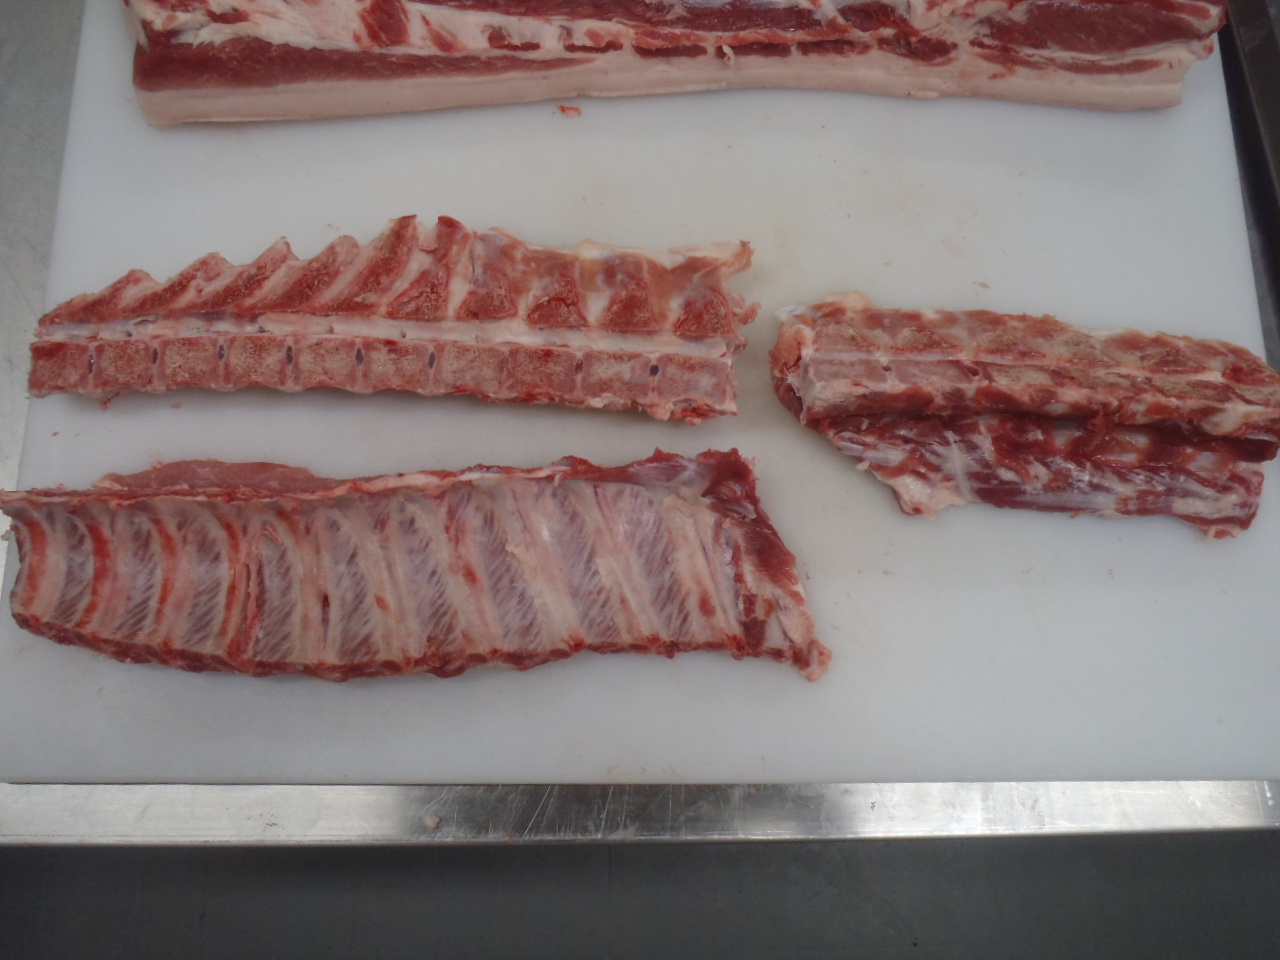 Removing the chine and feather bones from the back ribs